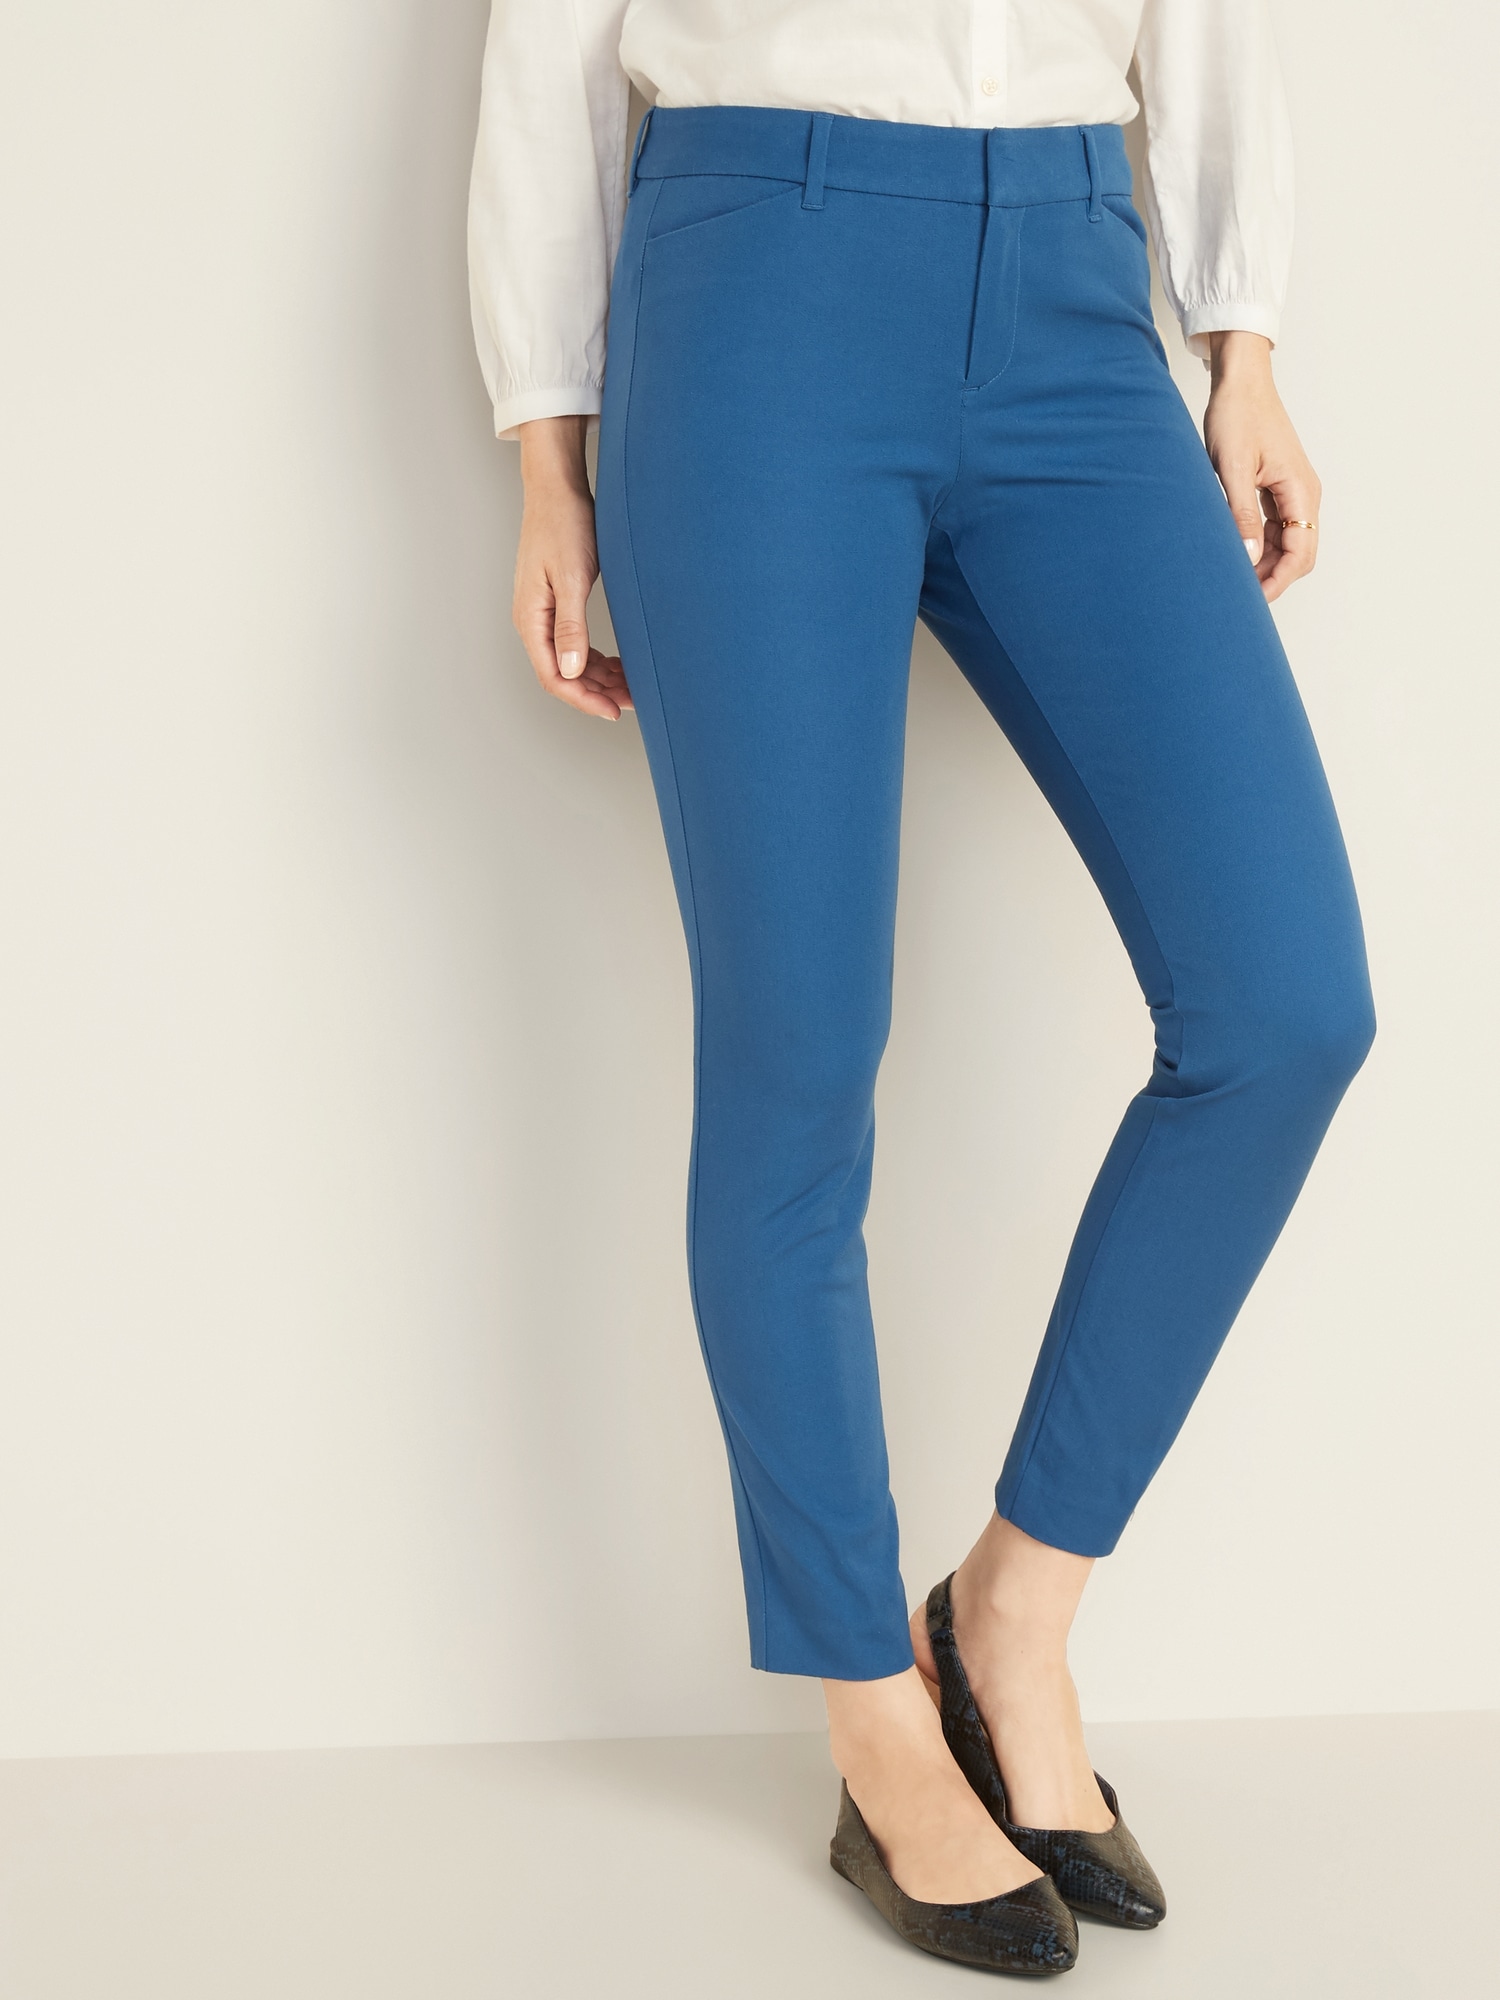 Mid-Rise Pixie Ankle Pants for Women, Old Navy